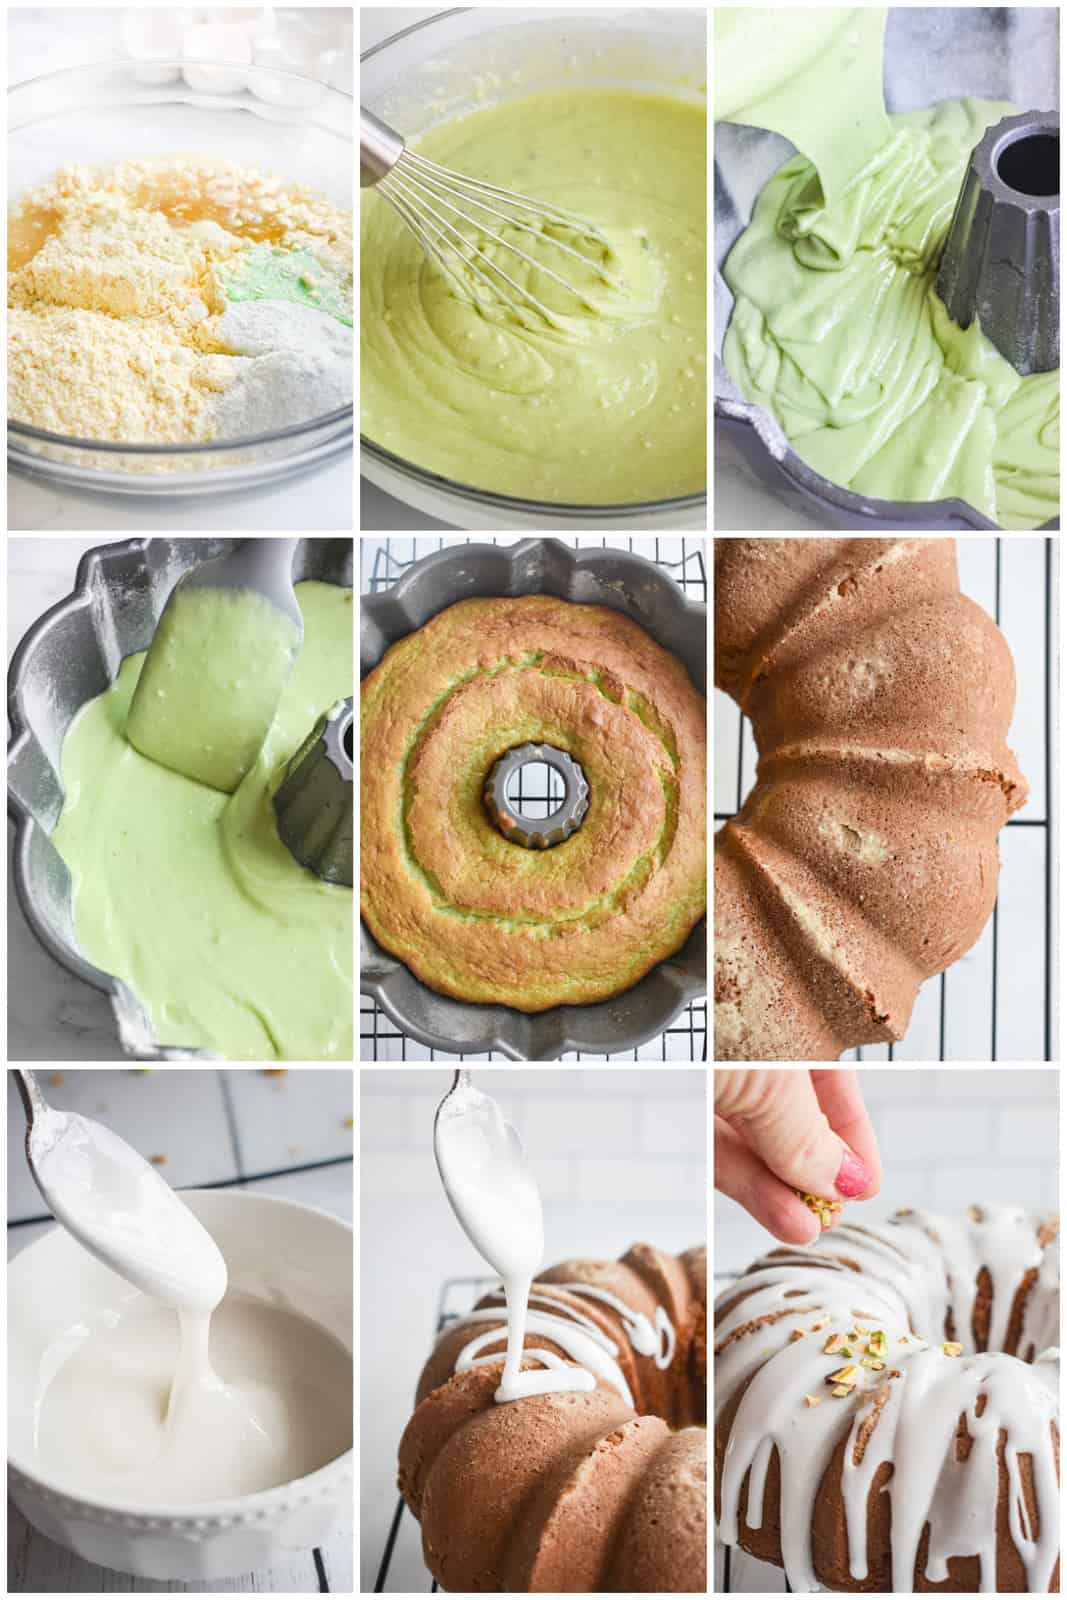 Step by step photos on how to make a Pistachio Cake